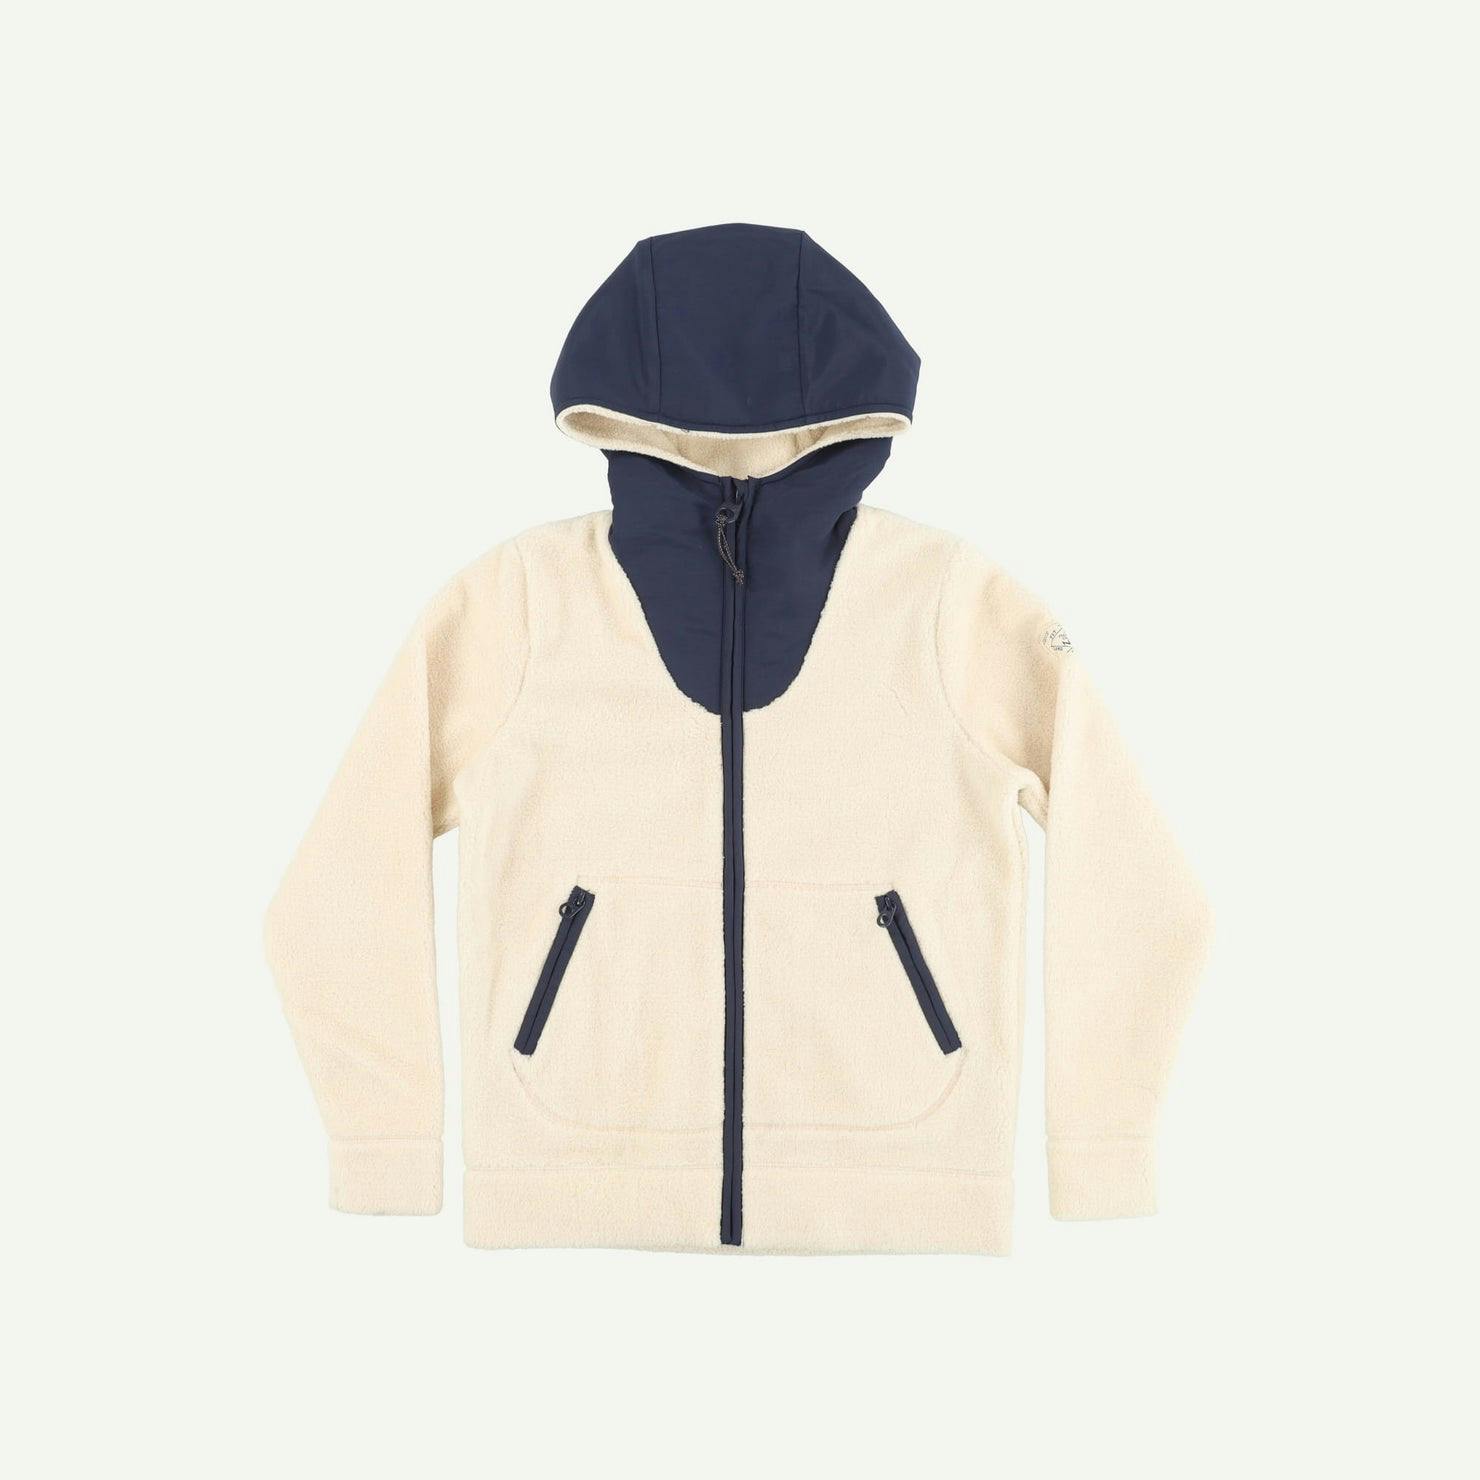 Joules As new Ivory Fleece